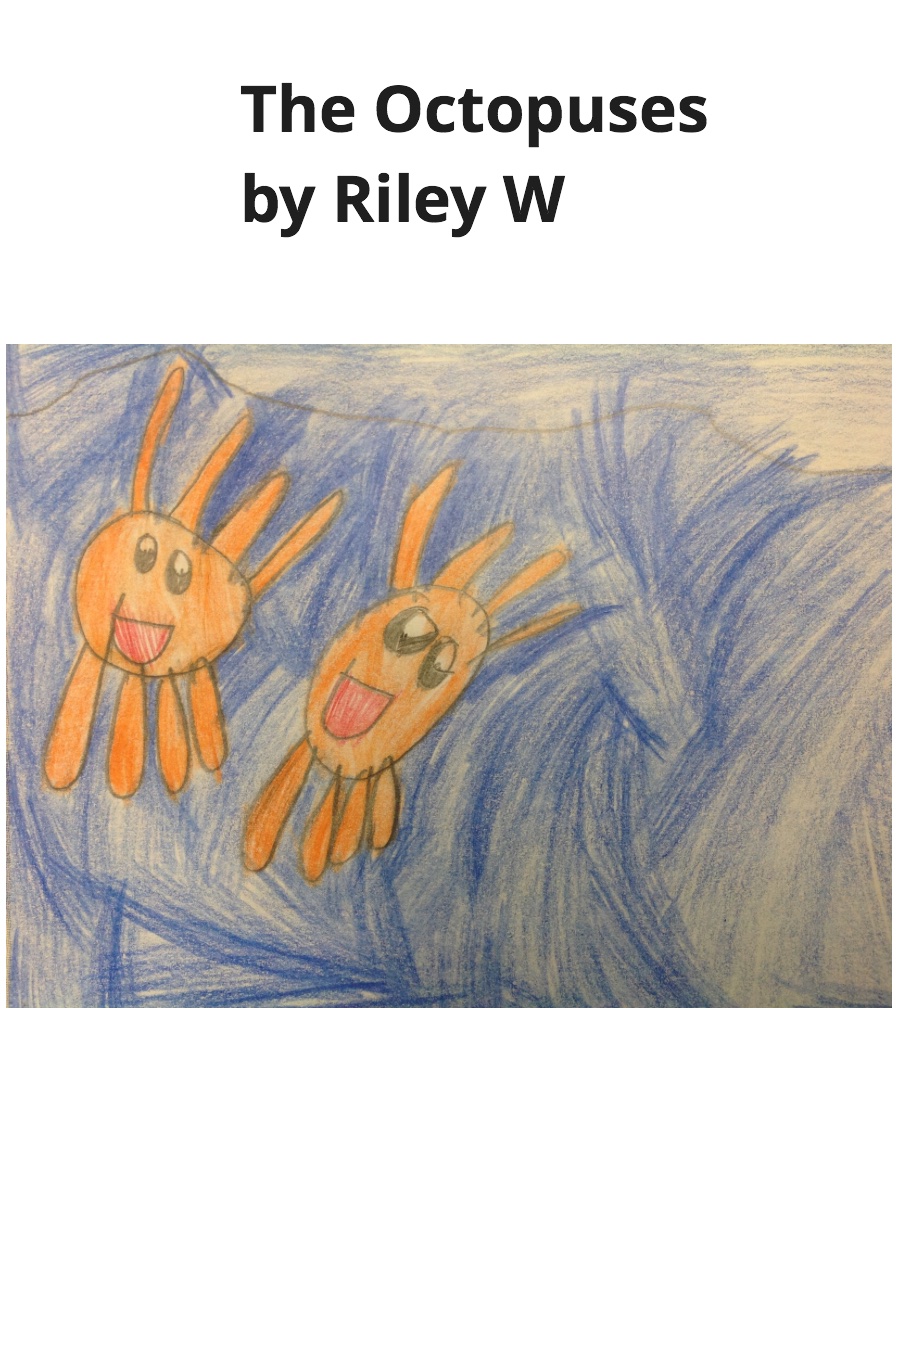 The Octopuses by Riley W